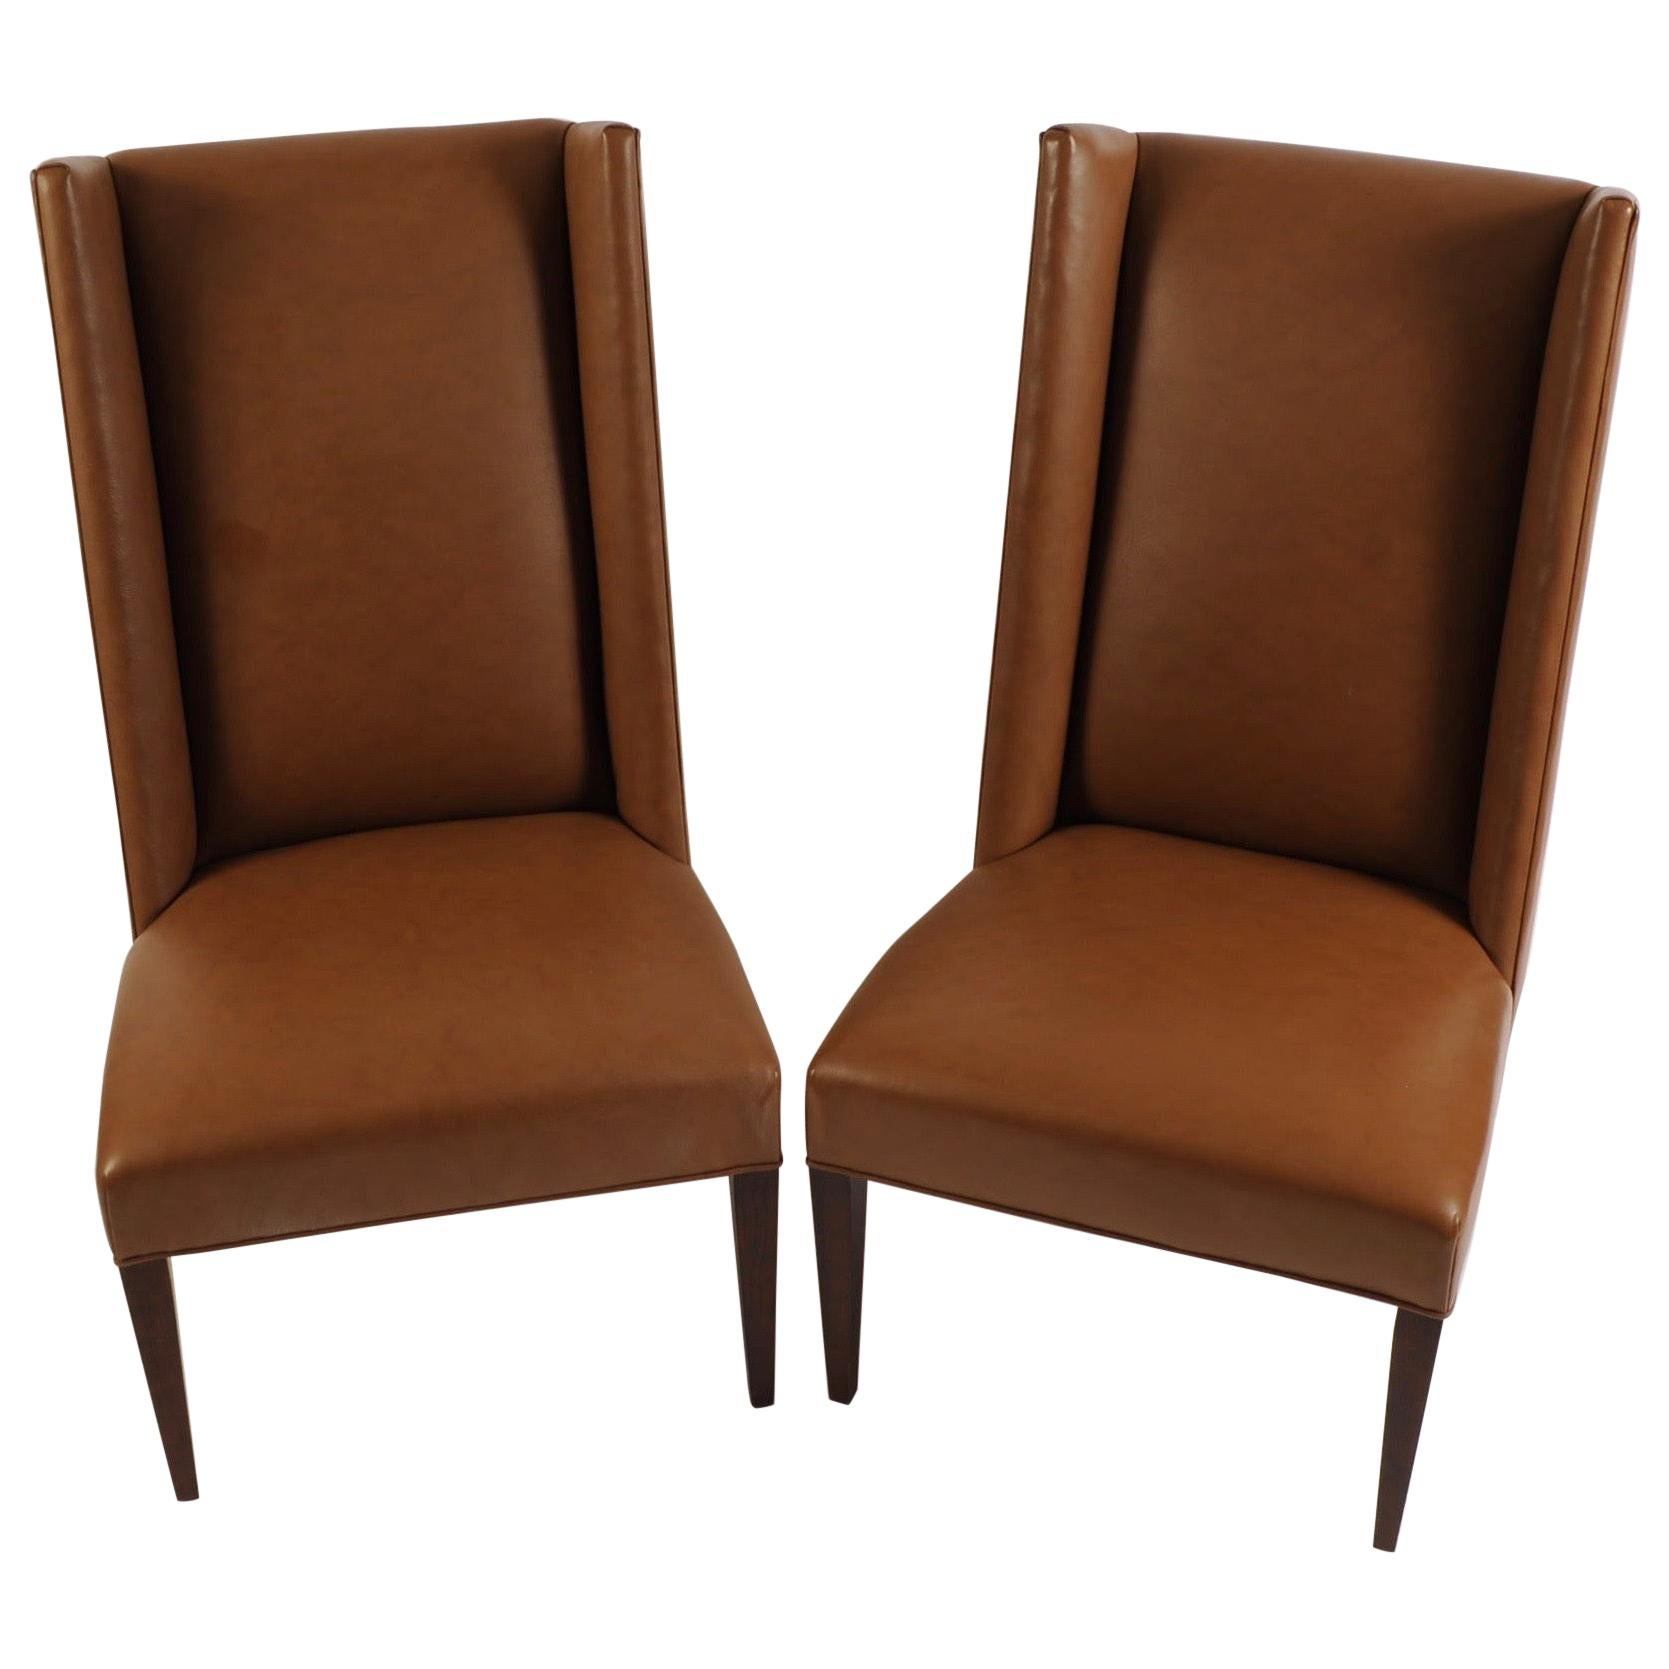 Martin Host Chairs by Hickory Chair